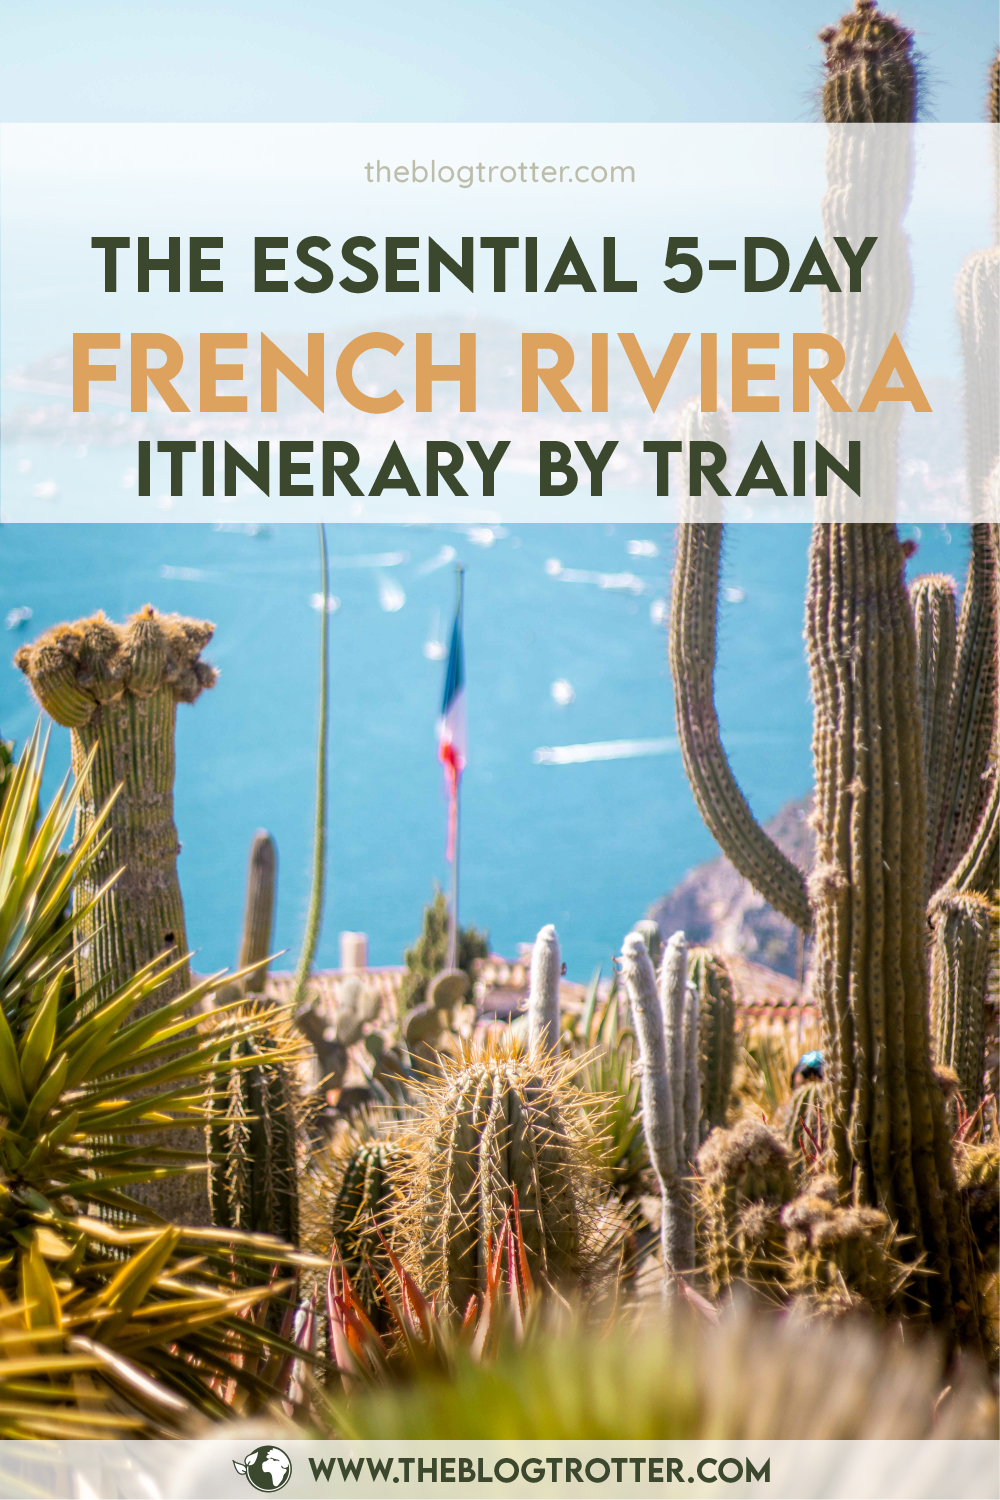 French riviera itinerary article visual for Pinterest - Option 2